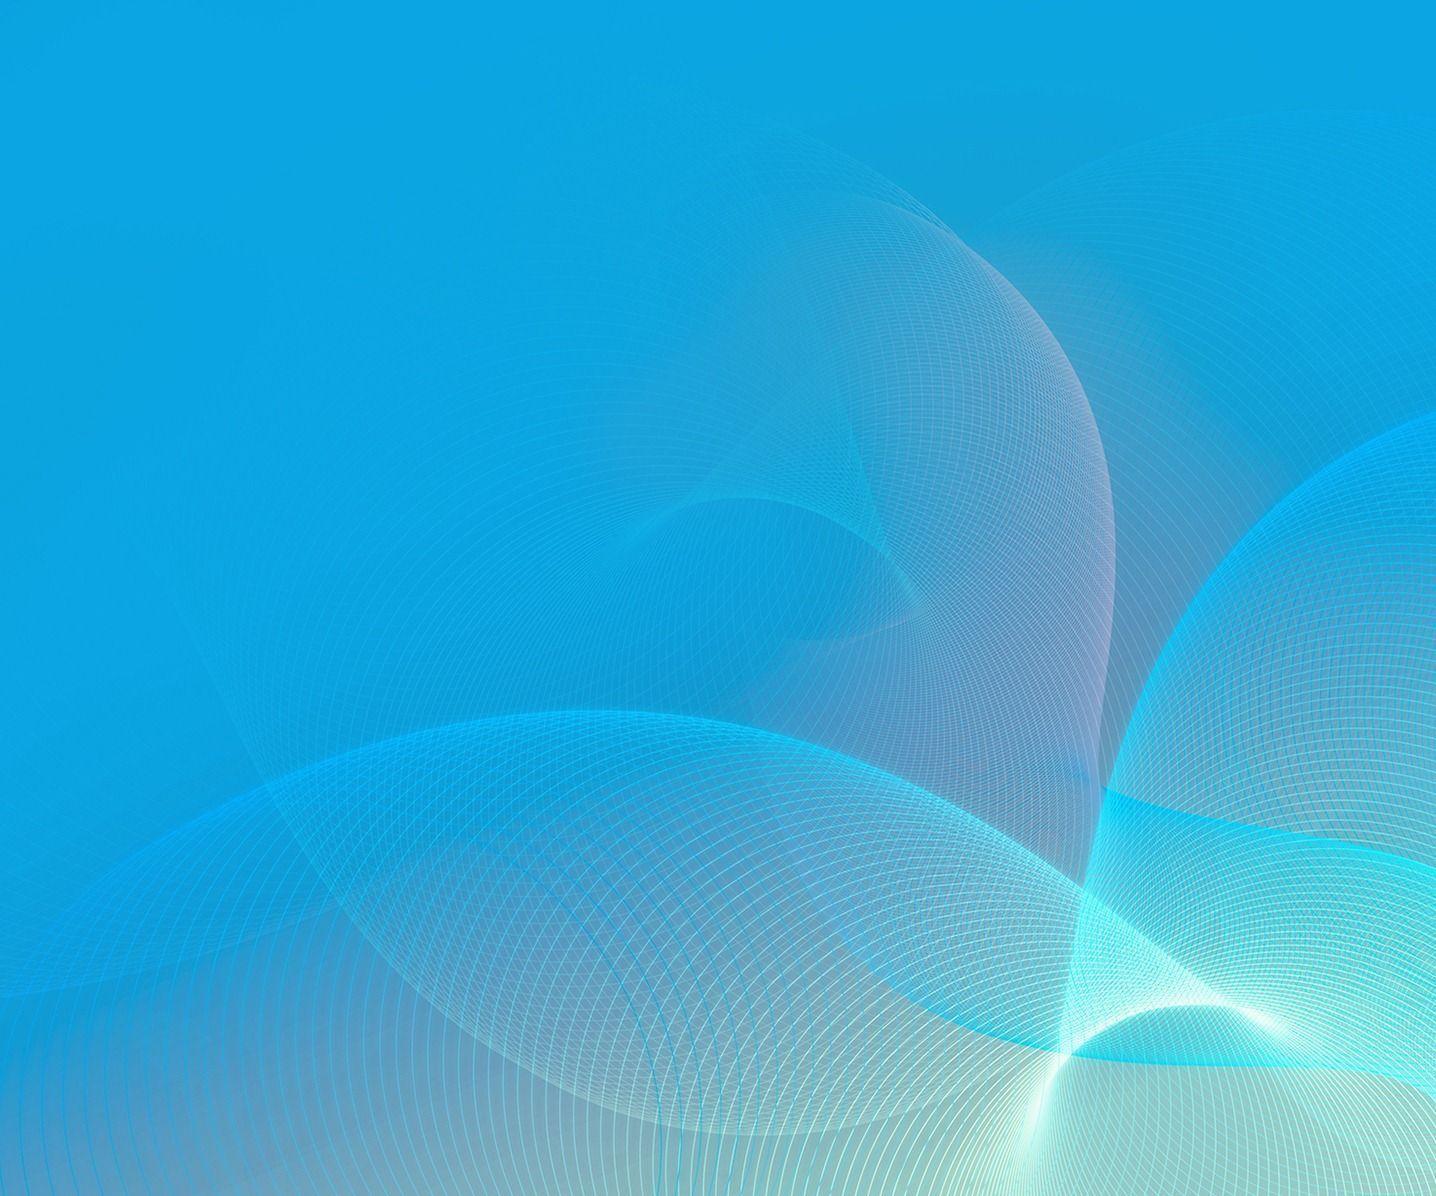 Official Wallpaper from Nexus 4 Android 4.2